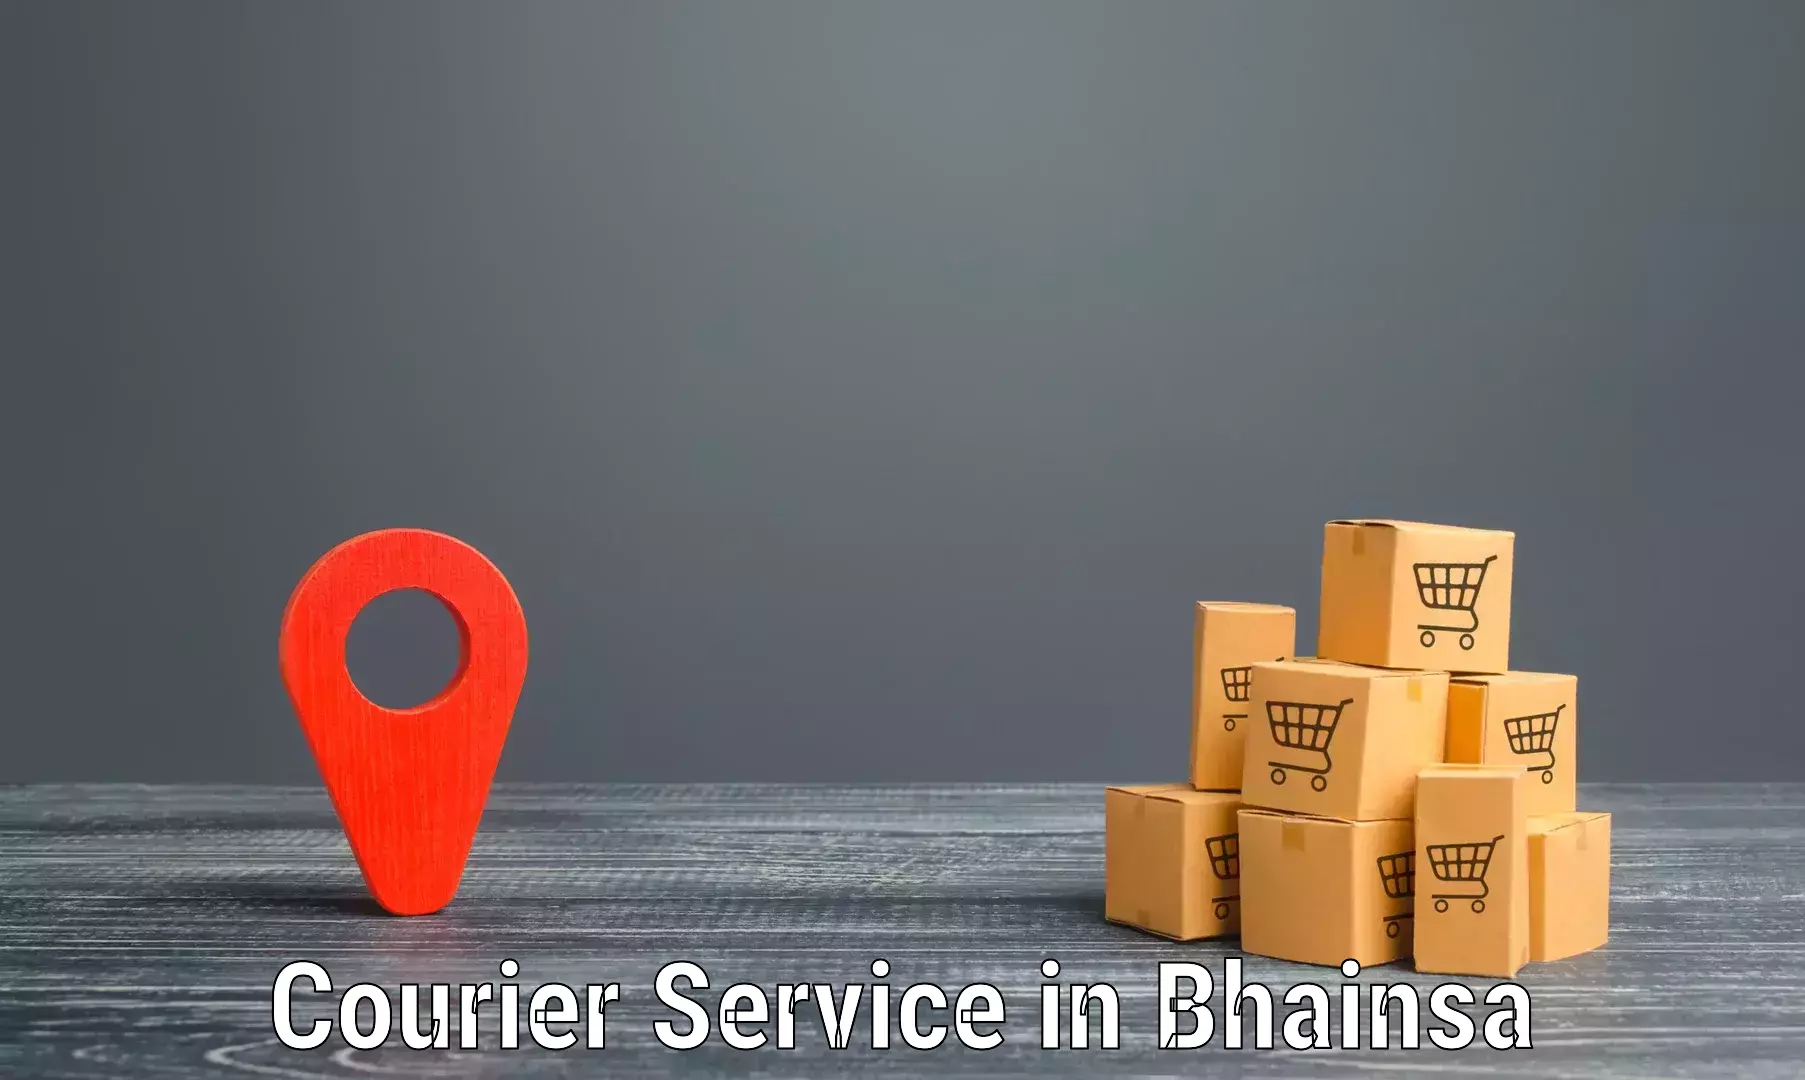 Subscription-based courier in Bhainsa